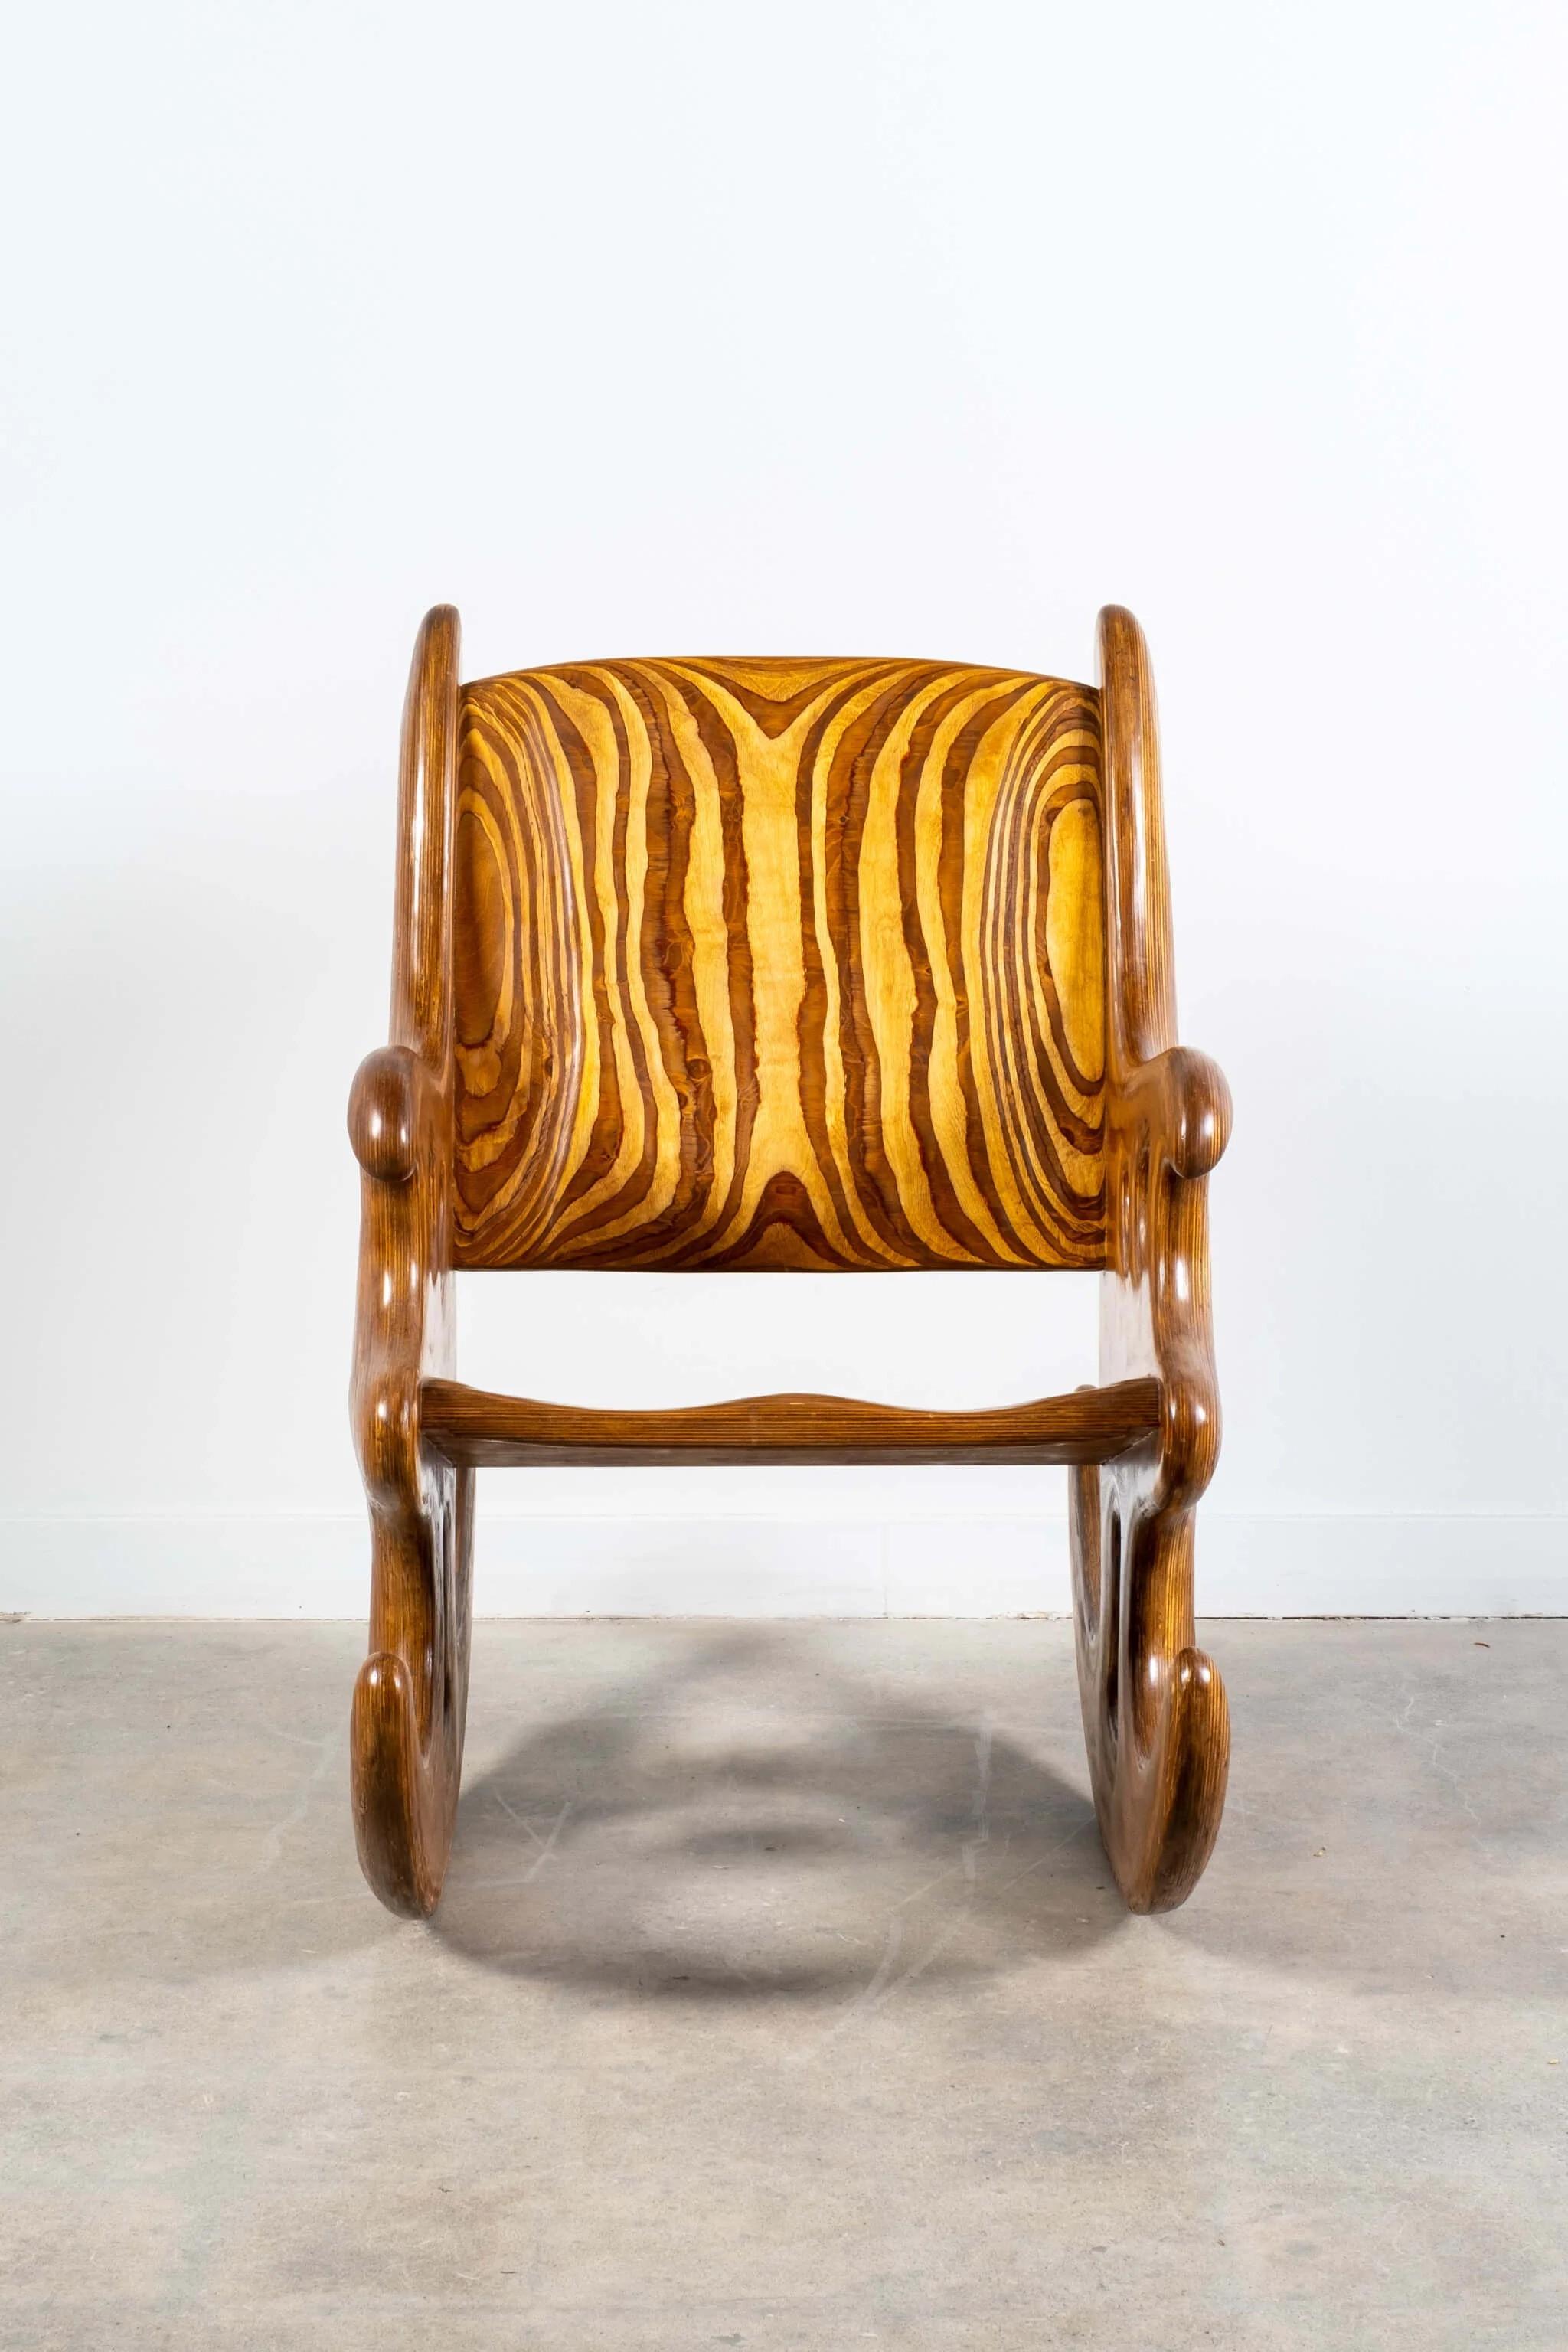 Futurist Studio Made Laminated Wood Rocking Chair by Douglas Hackett For Sale